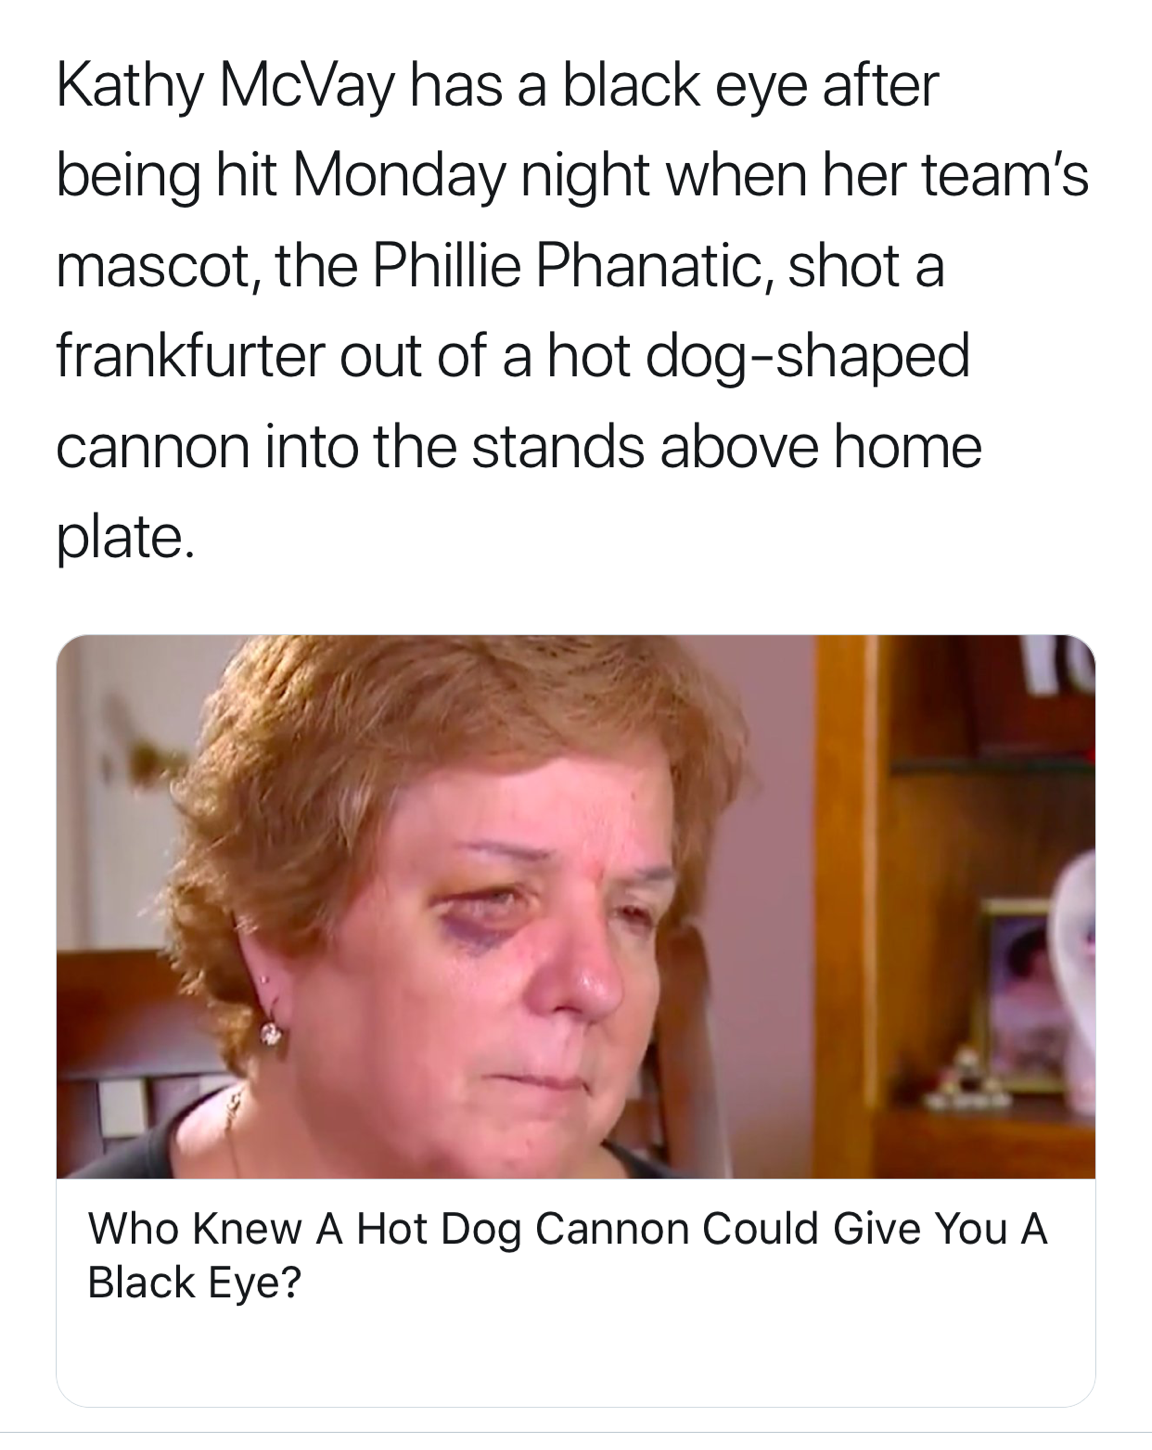 woman gets bruised eye from hot dog canon